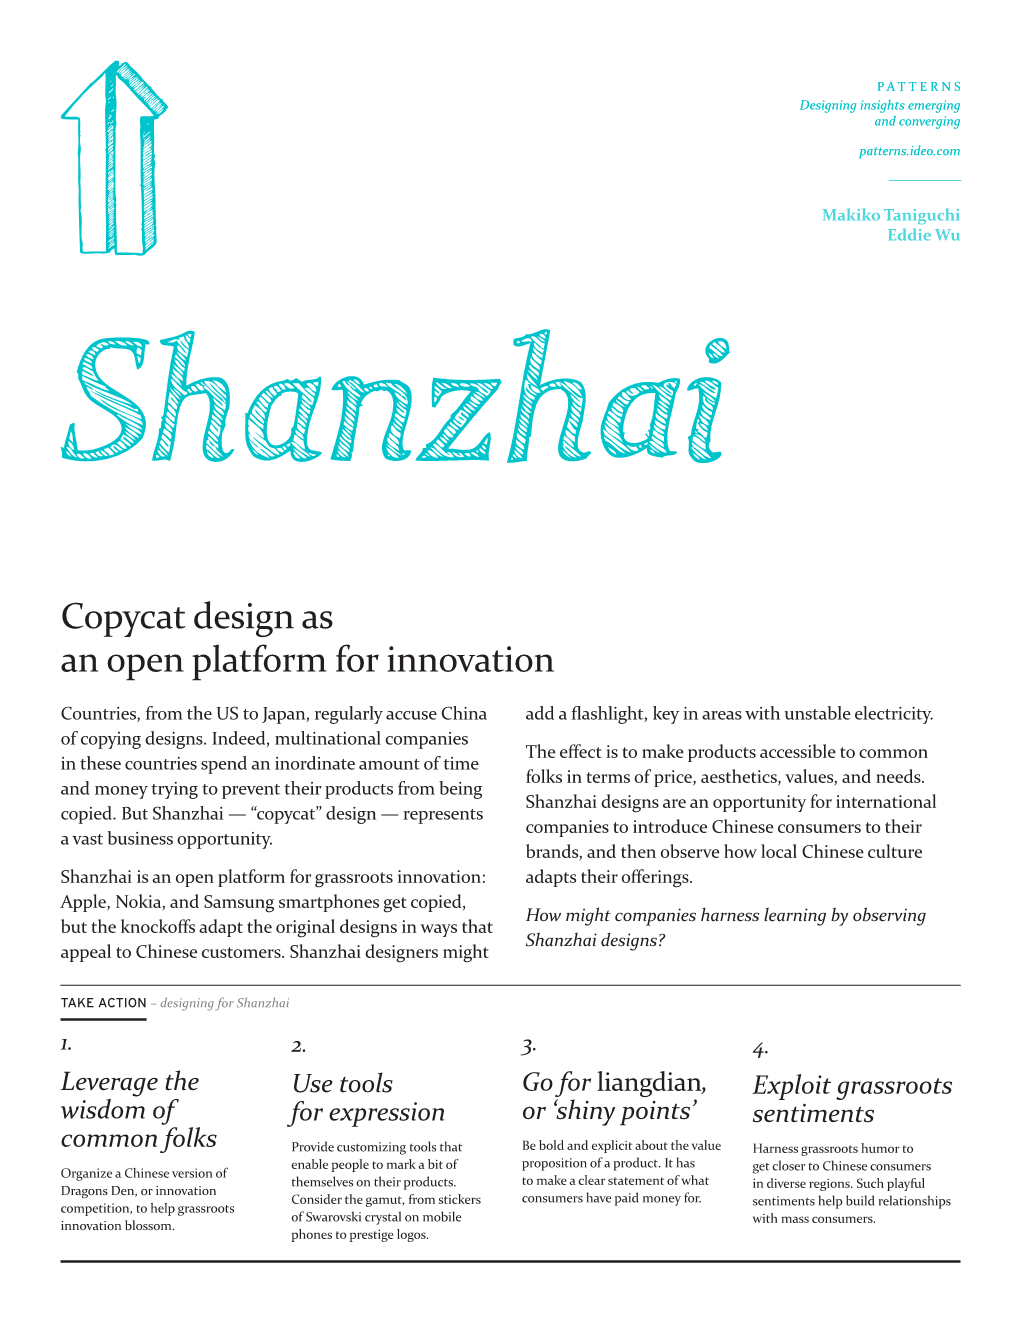 Shanzhai Designs Are an Opportunity for International Copied